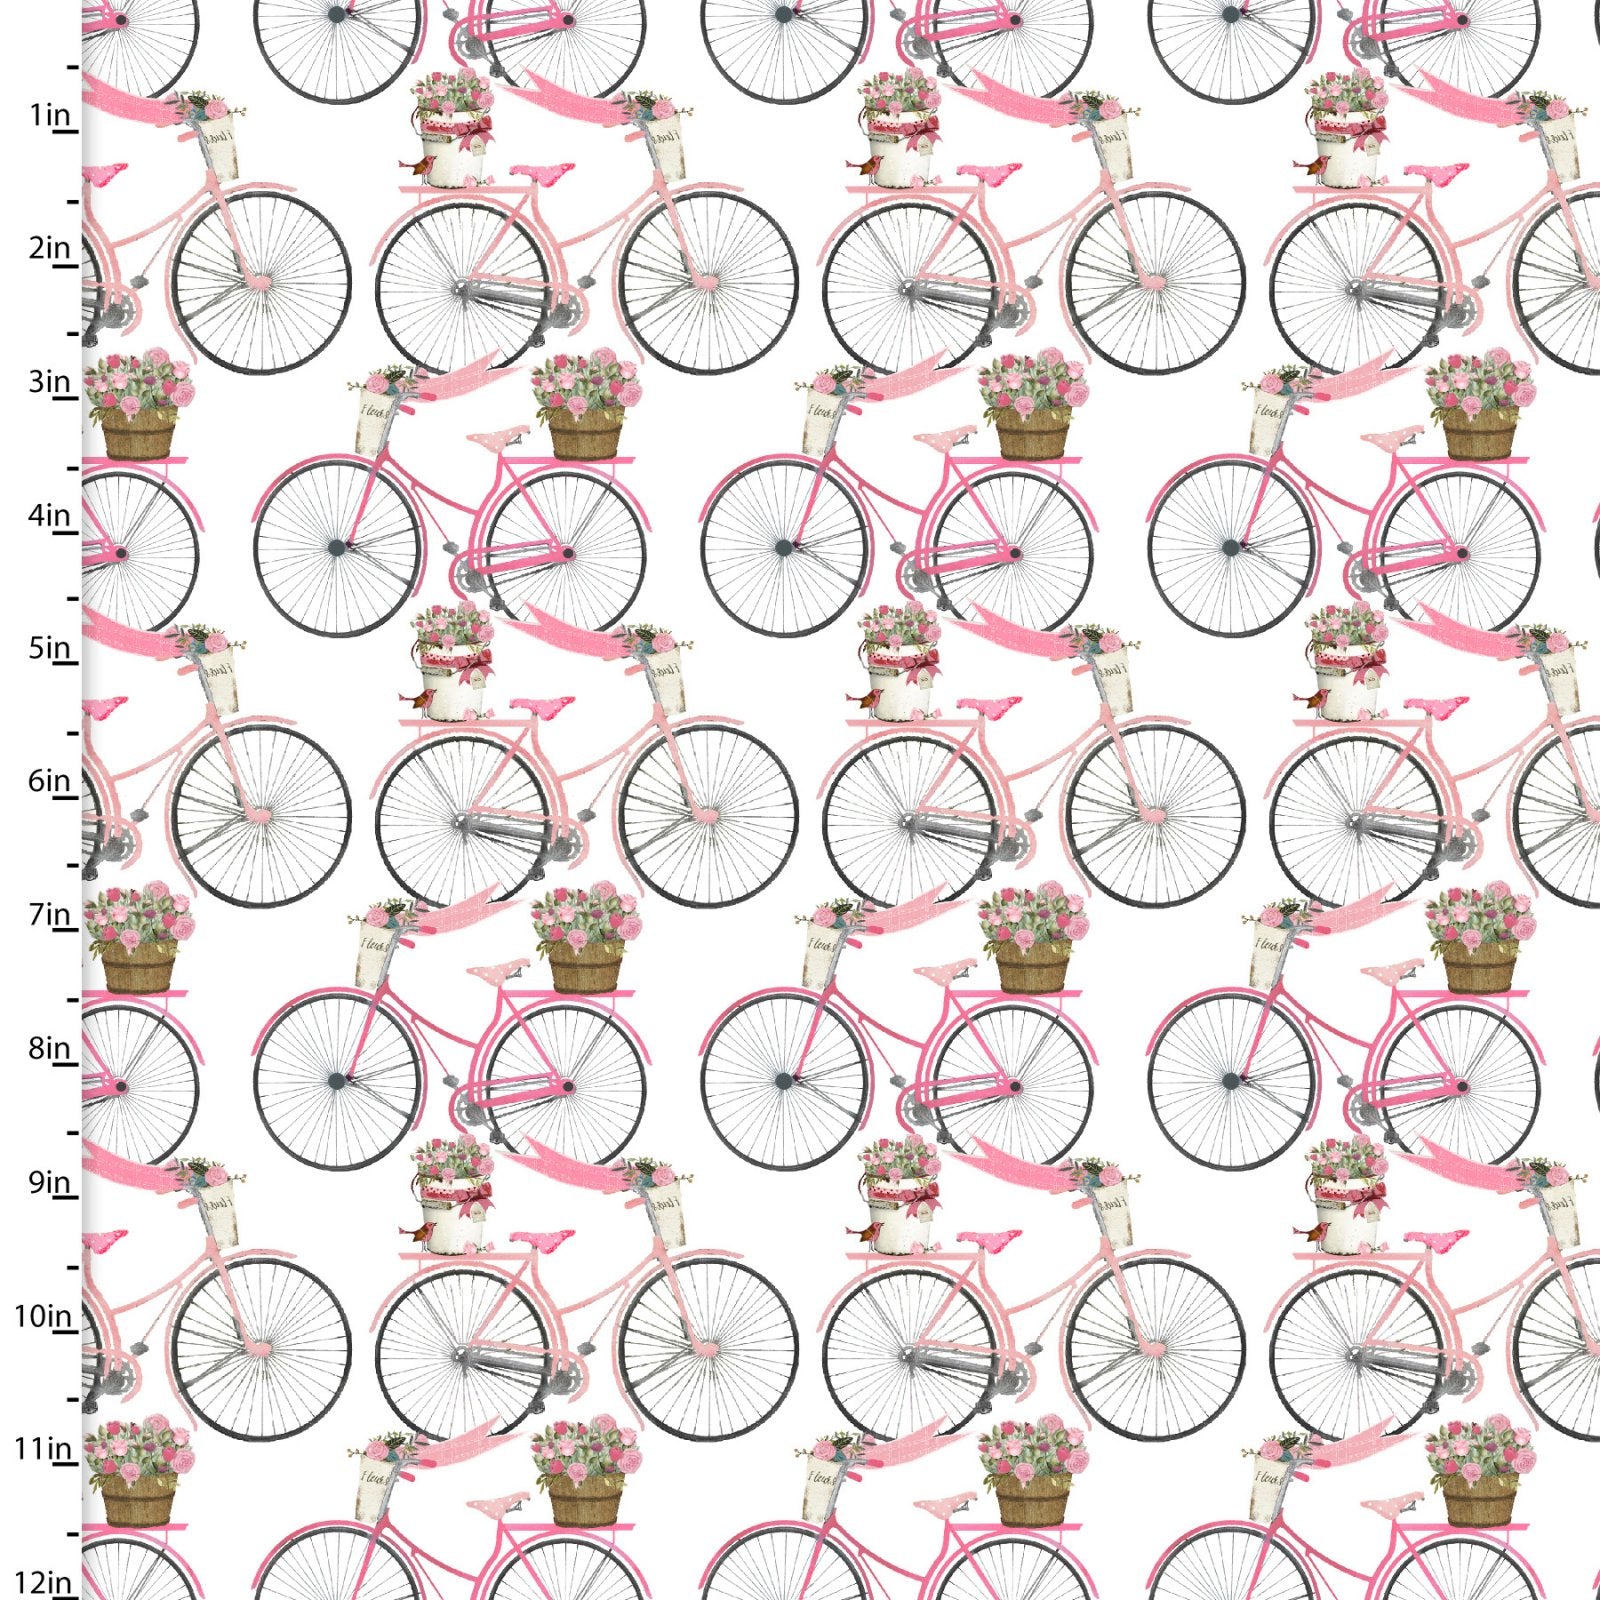 Vintage pink bicycles with flower baskets full of roses on white 100% cotton fabric. Hugs Kisses by 3 Wishes